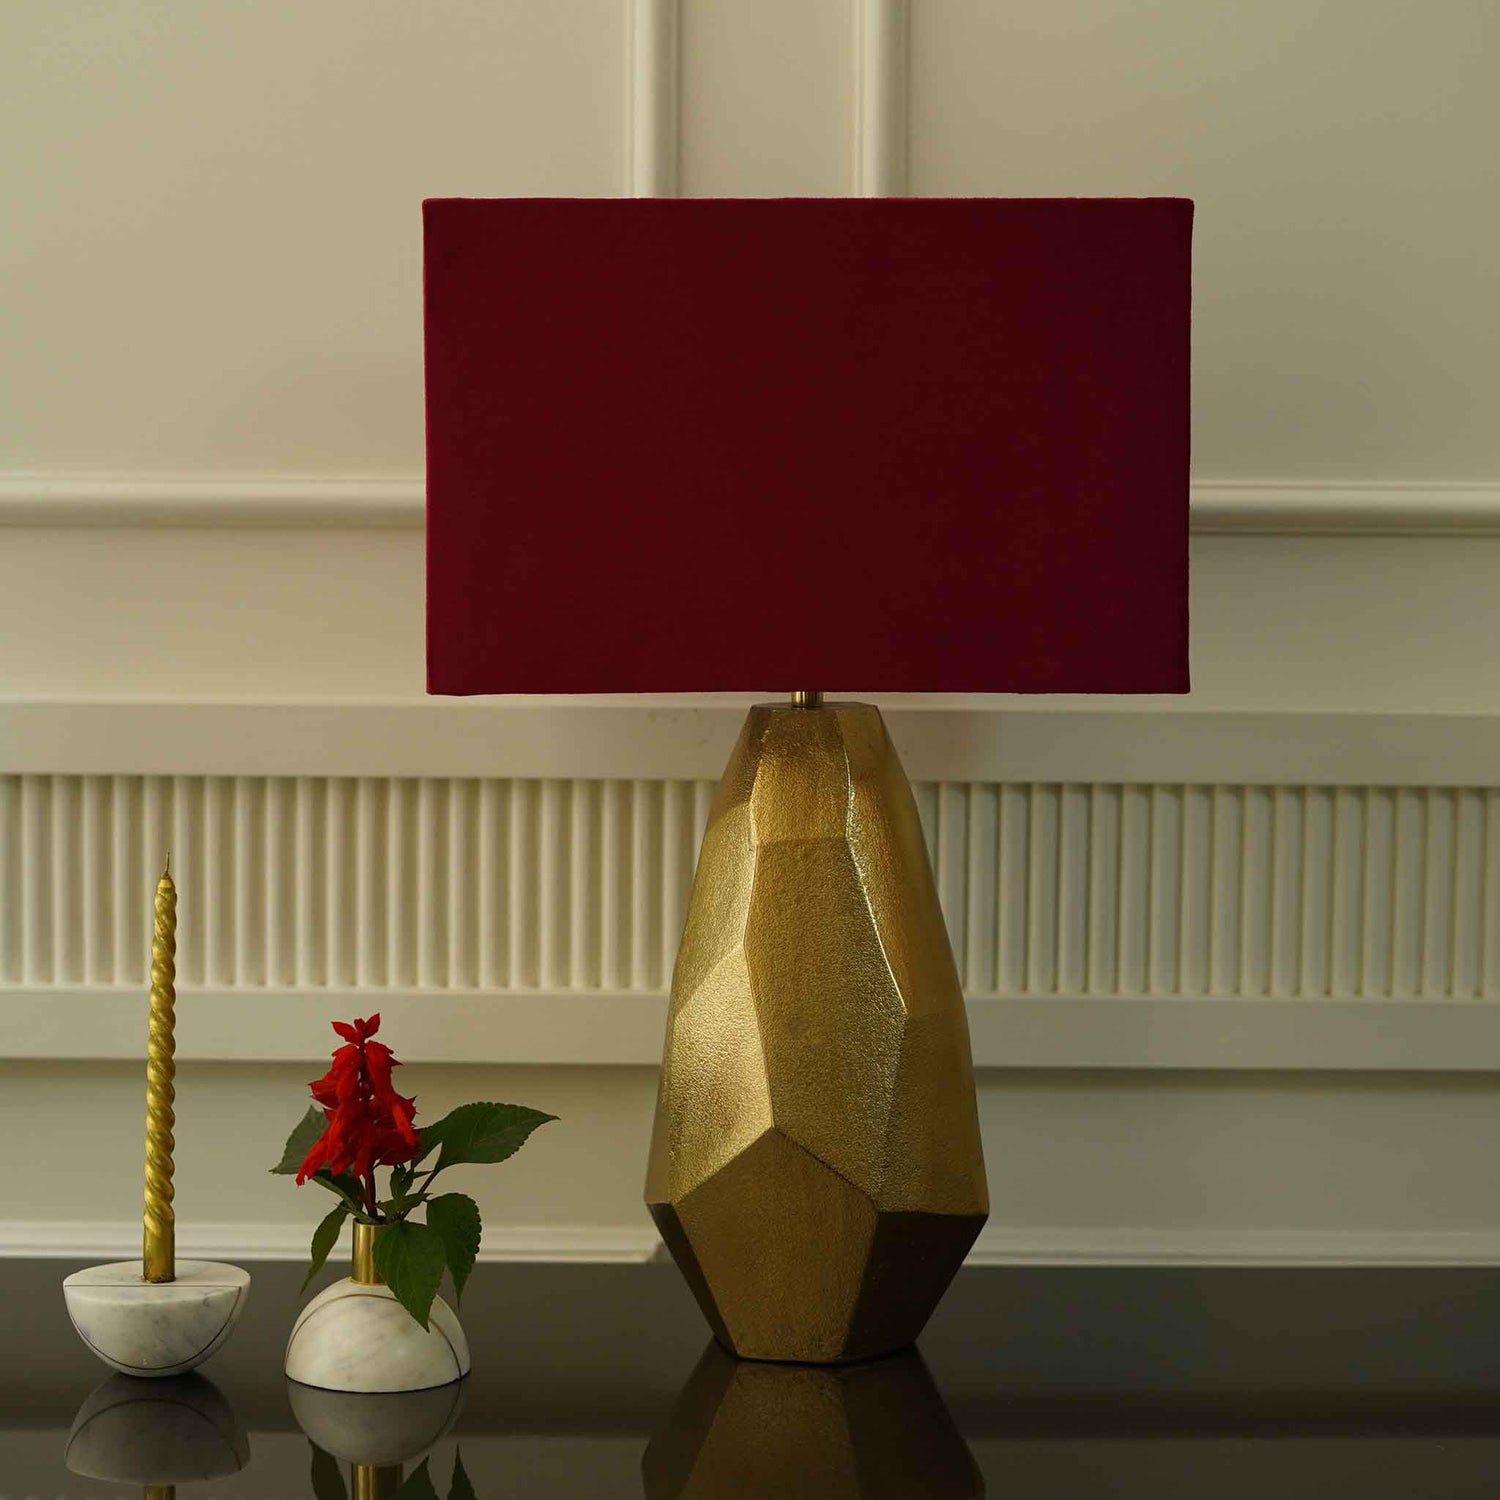 Golden color metallic textured table lamp with red lamp shade.